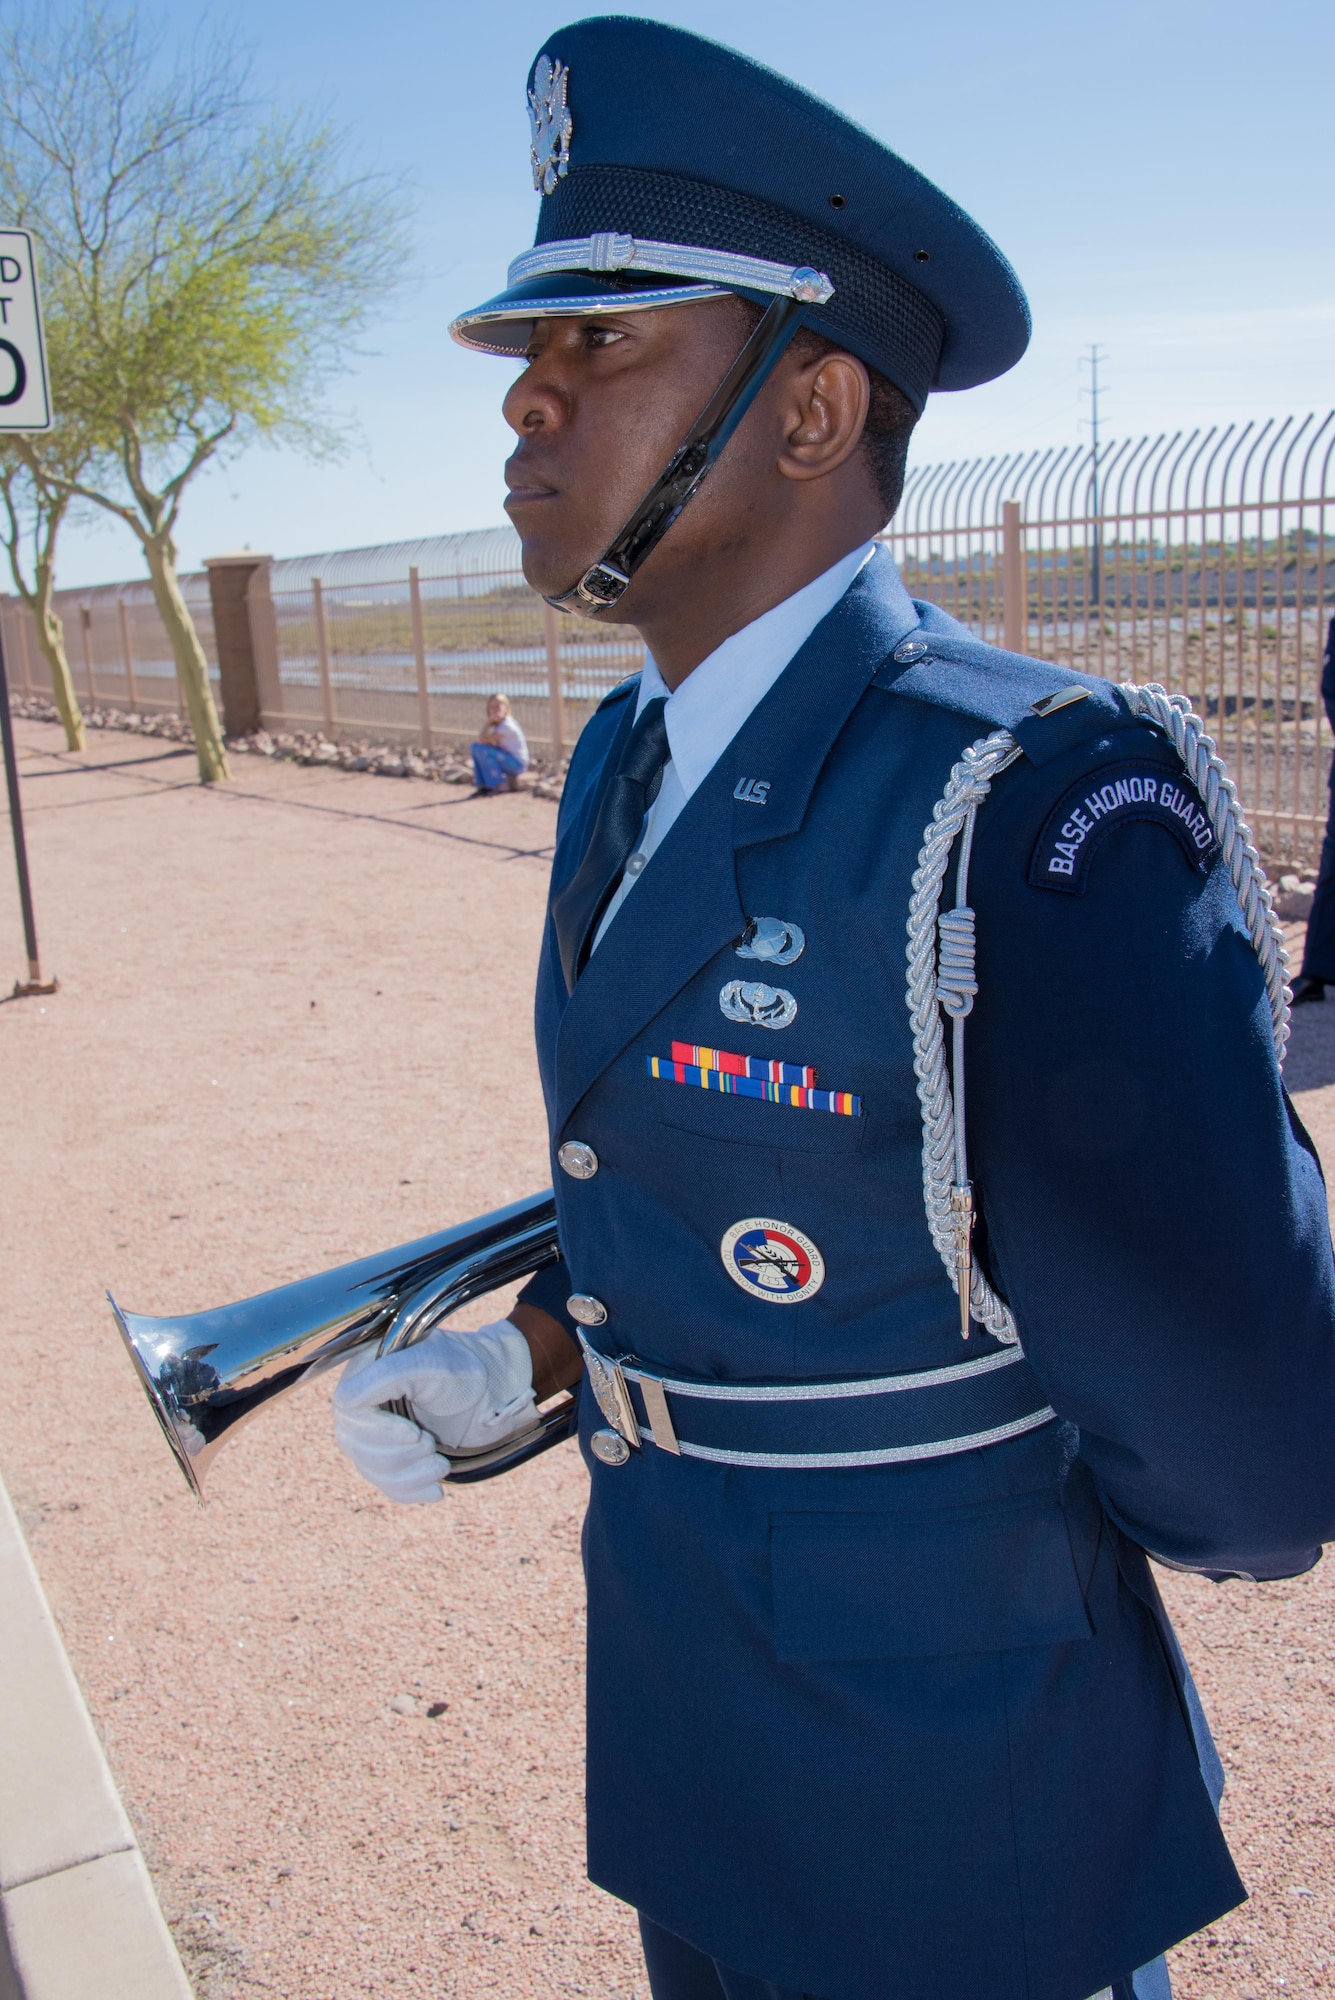 U.S. Air Force 2nd Lt. Tinashe Machona, assigned to the 161st Air Refueling Wing, stands at attention in a color guard detail before playing taps on his trumpet during Copper 5, an air crew memorial ceremony, at Goldwater Air National Base, Phoenix Ariz., March 13, 2017. Machona was the recipient of the 2016 Maj. Gen. Donald L. Owens Junior Officer of the year award at the wing. (U.S. Air National Guard photo by Staff Sgt. Wesley Parrell)